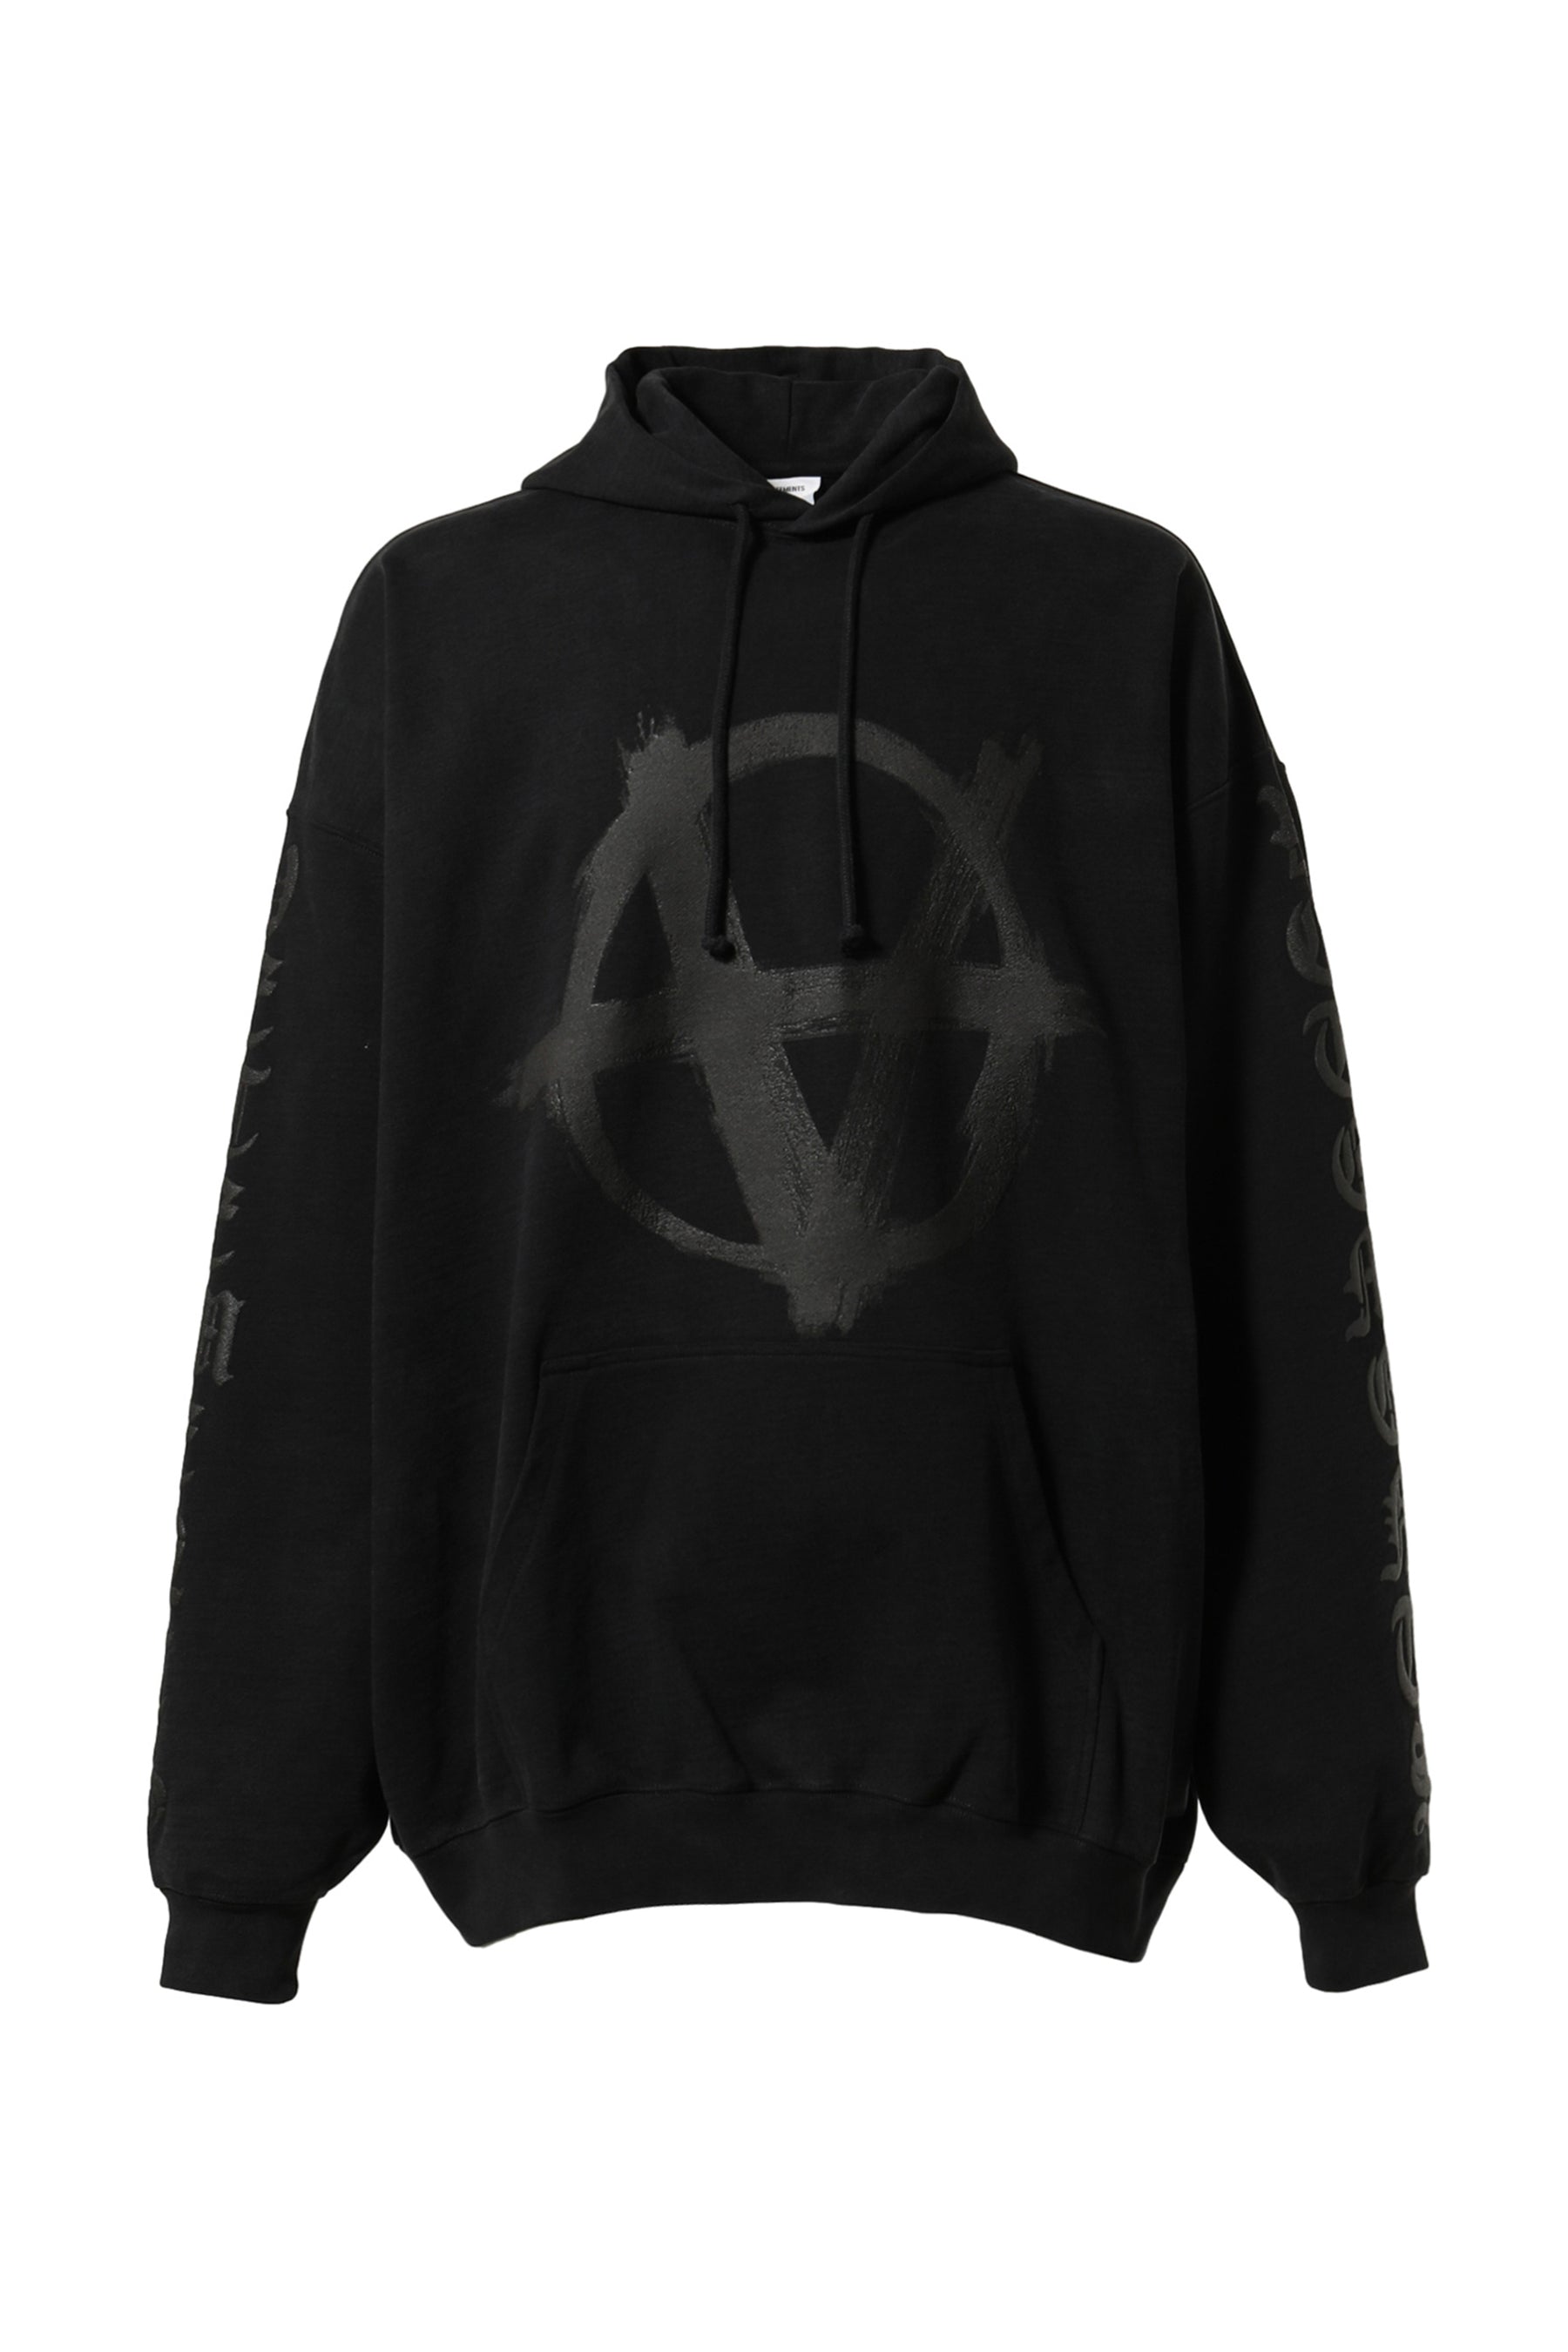 VETEMENTS ヴェトモン FW23 REVERSE ANARCHY HOODIE / WASHED BLK BLK